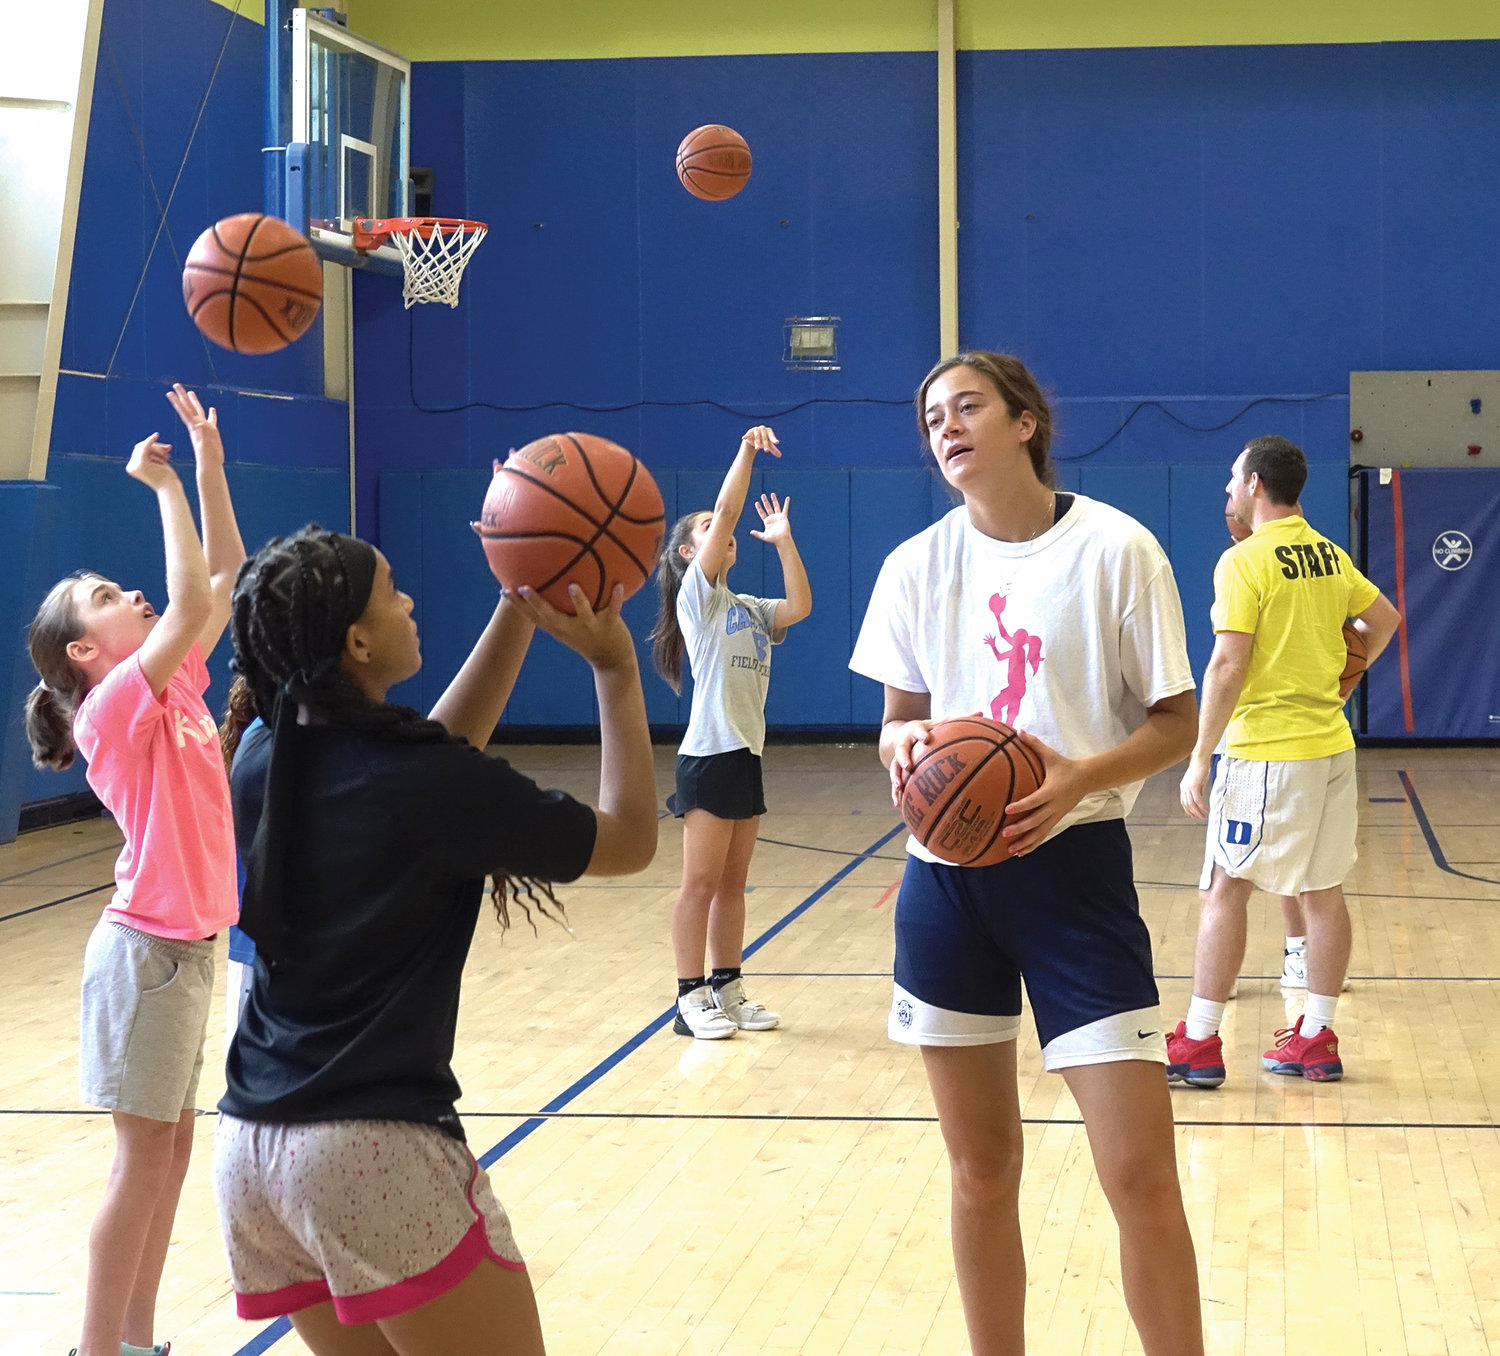 HOMECOMING—Our Lady of Lourdes High School graduate and Villanova University women’s basketball star Maddy Siegrist offers instruction in basketball fundamentals at the Maddy Siegrist Girls’ Basketball Clinic at Poughkeepsie Day School Aug. 16.